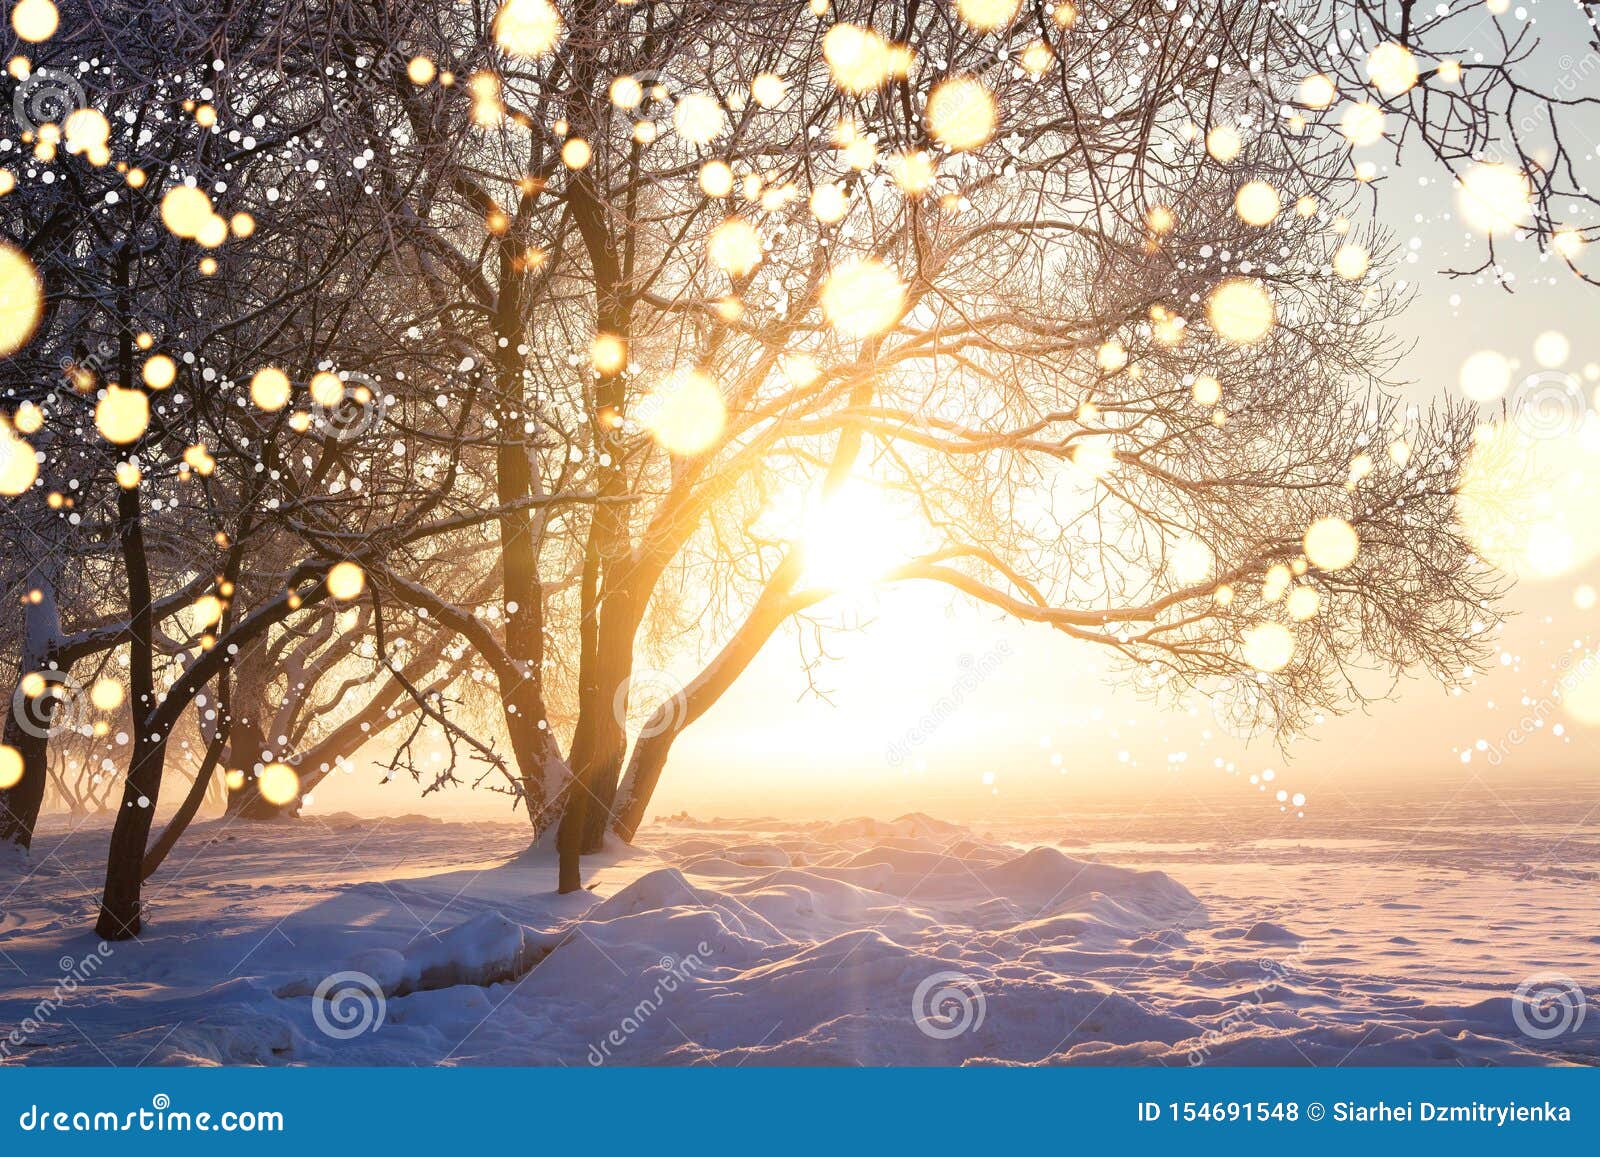 Pil pessimistisk Champagne Winter Christmas Background. Illuminated Snowflakes Bokeh. Winter Nature  Landscape with Bright Sun. Snowflakes in Sunlight. Winter Stock Photo -  Image of snow, snowy: 154691548